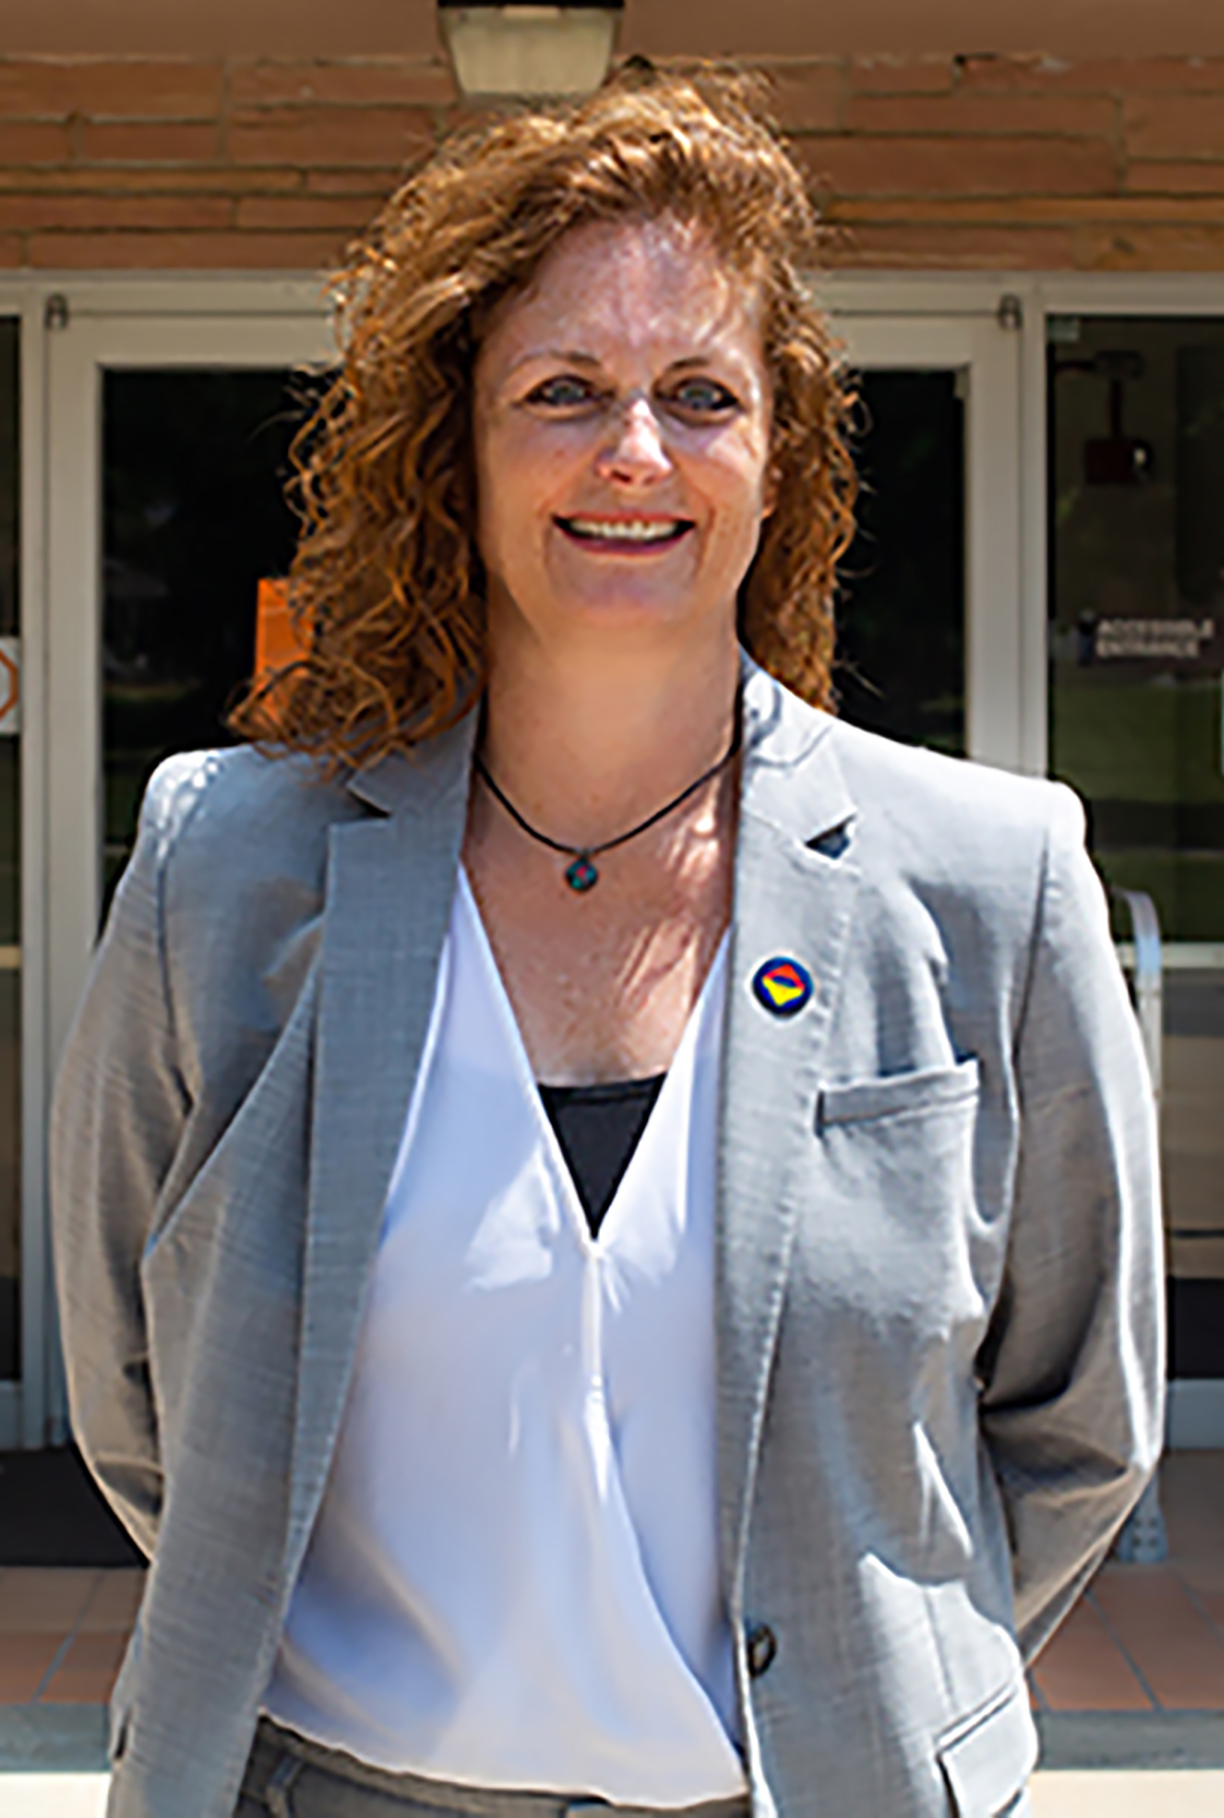 White woman with red curly hair stands outside of a brick building in a grey suit jacket and white blouse. She is seen from the waist up and is smiling at the camera with her hands behind her back